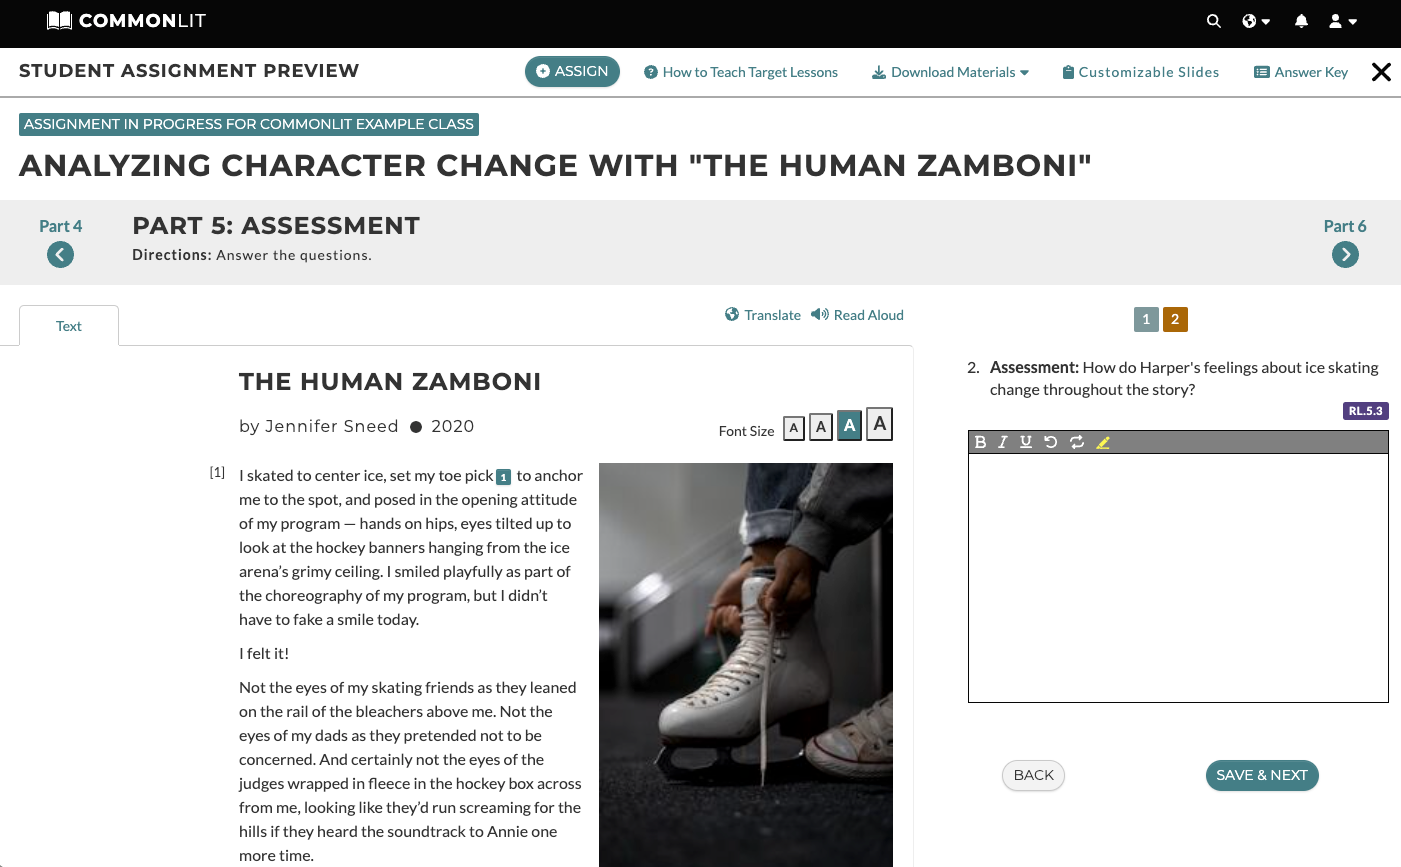 A screenshot of the Assessment section of the Target Lesson, "The Human Zamboni." Students are asked how Harper's feelings about ice skating change throughout the story, giving them an opportunity to demonstrate their understanding of the target skill. The photo includes the story on the left hand-side and the assessment questions on the right.